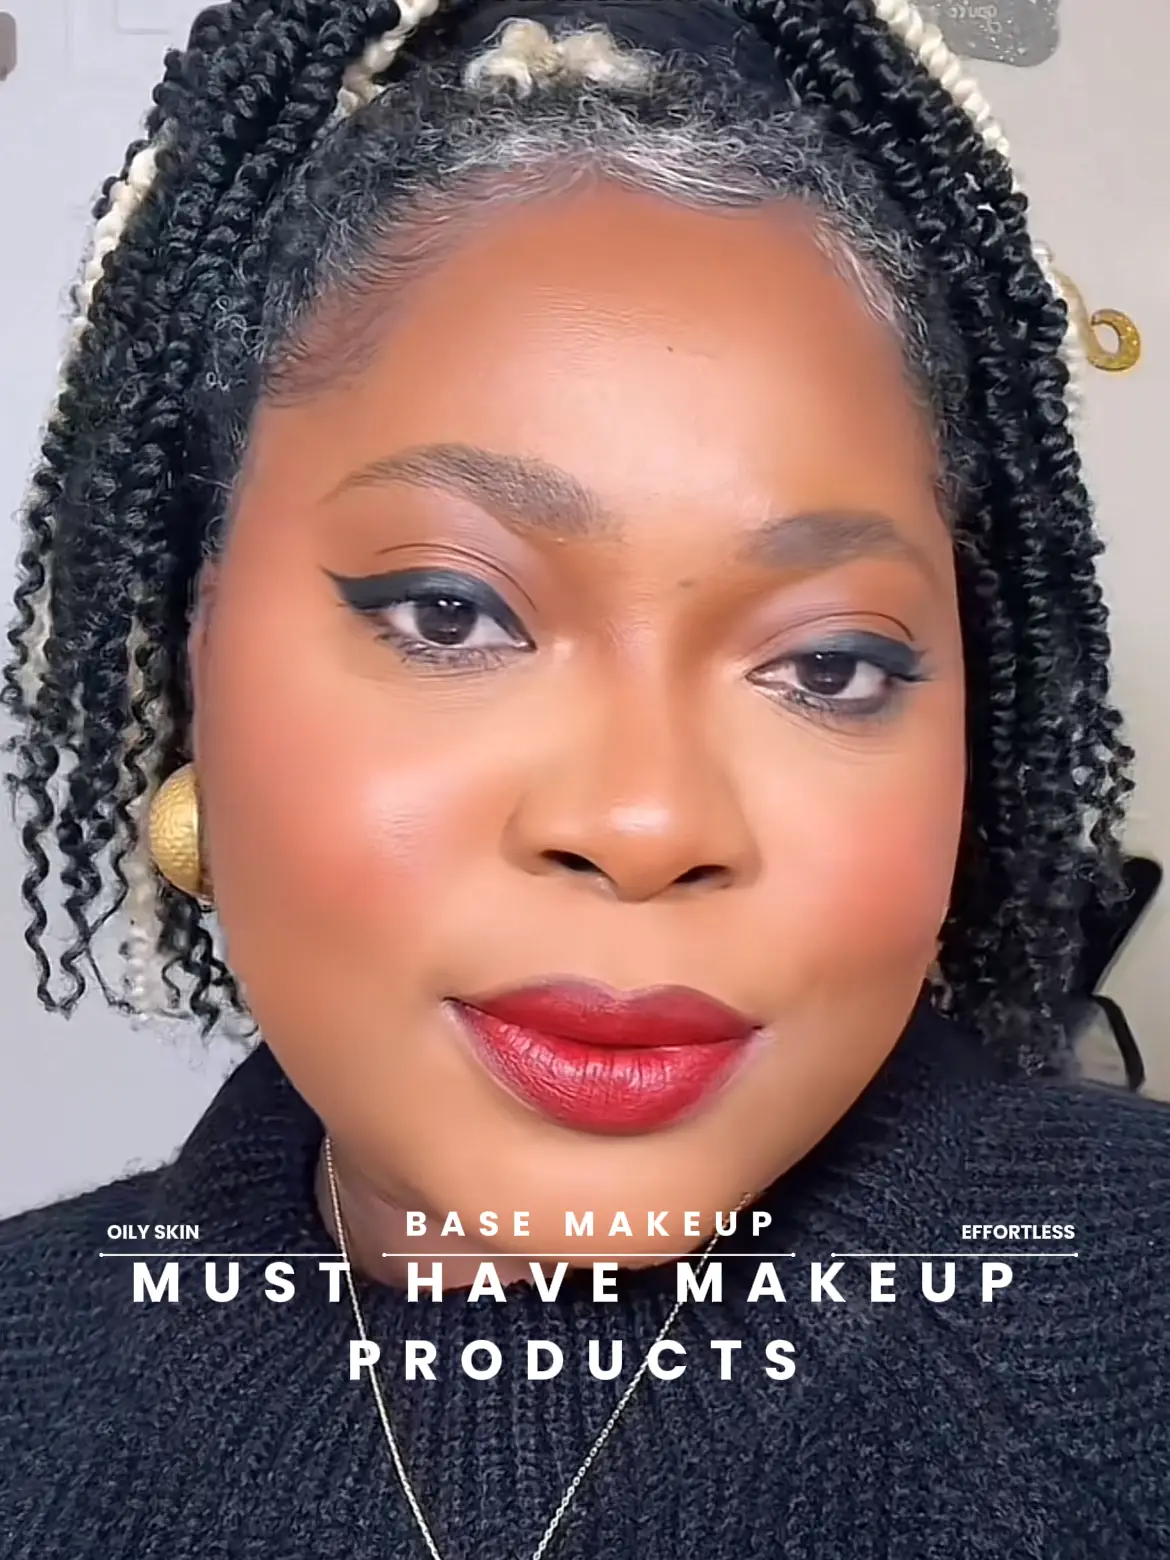 Makeup Products For Everyday Looks